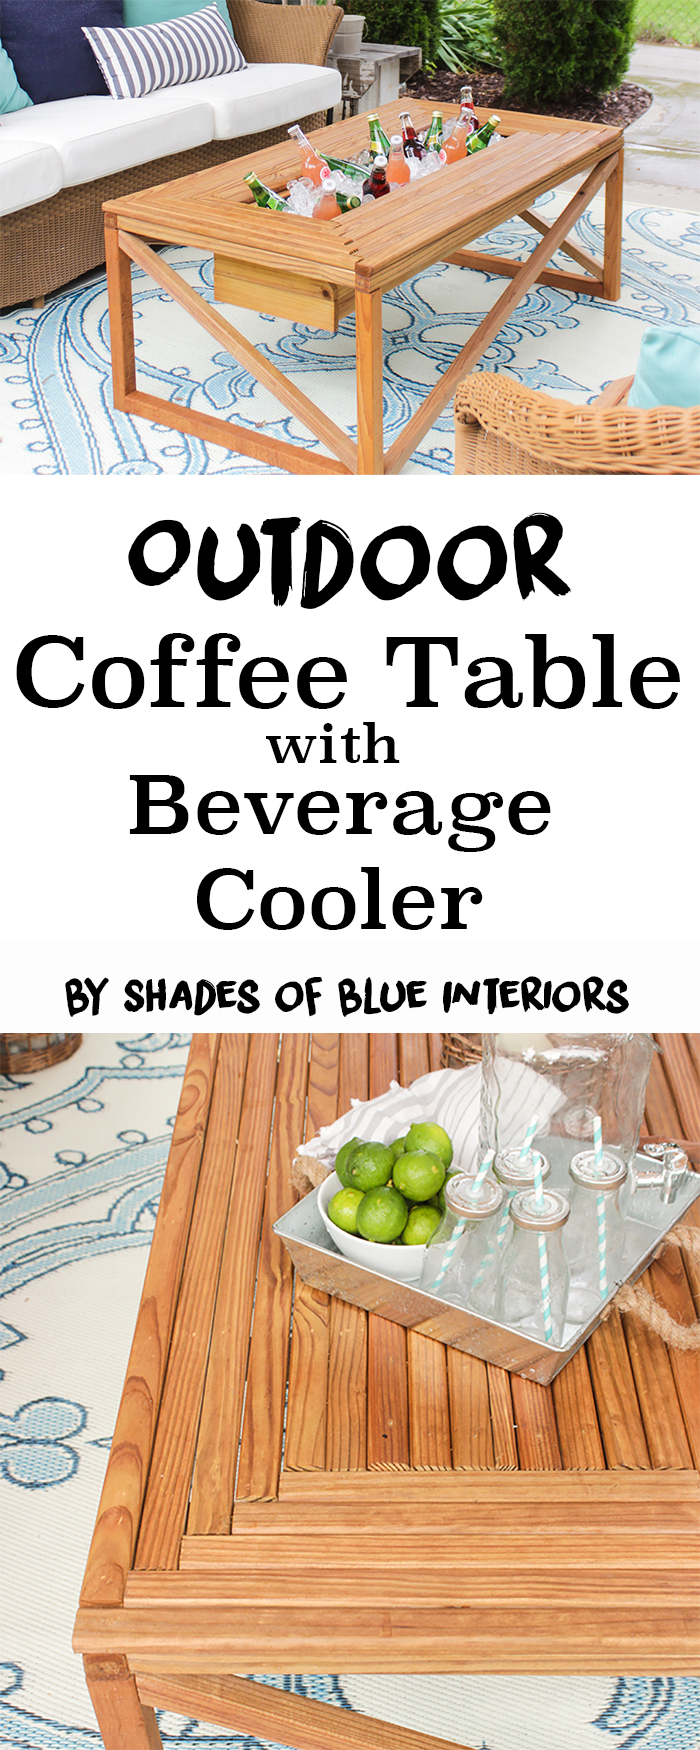 Outdoor-Coffee-Table-with-Beverage-Cooler